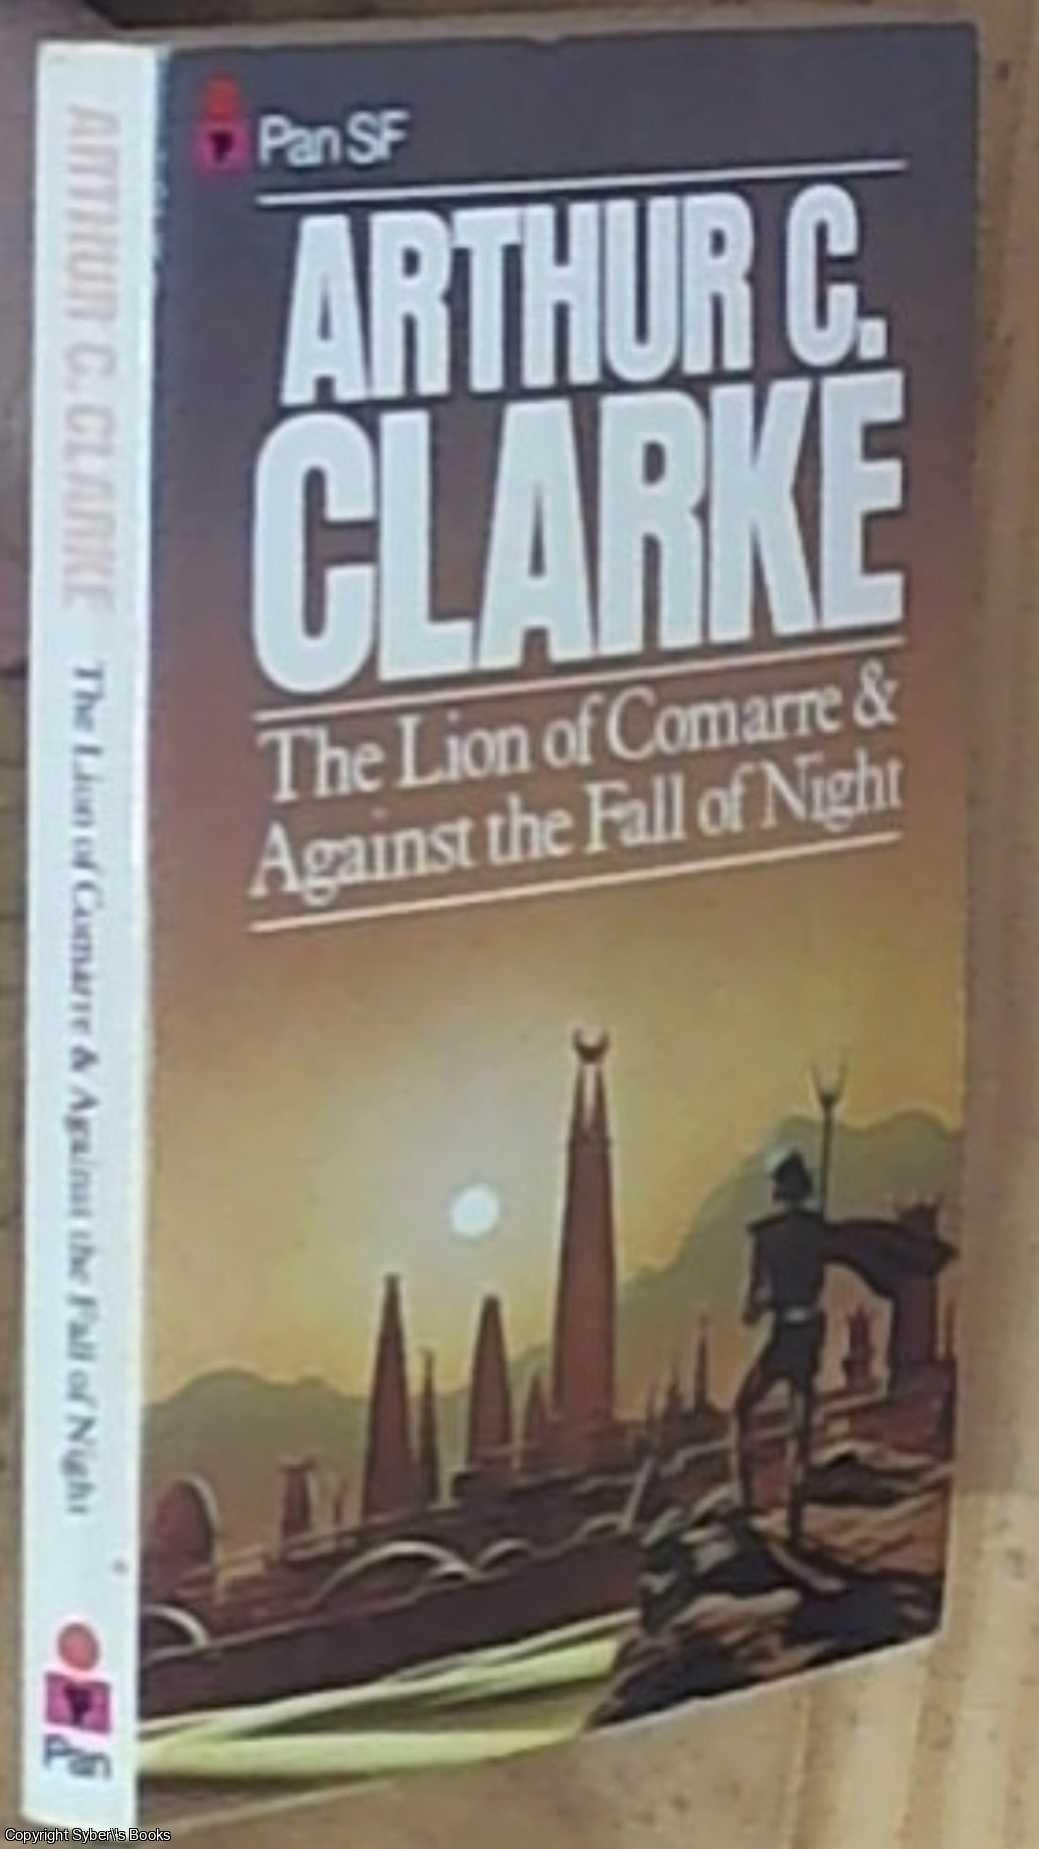 Clarke, Arthur C. - The Lion of Comarre & Against the Fall of Night